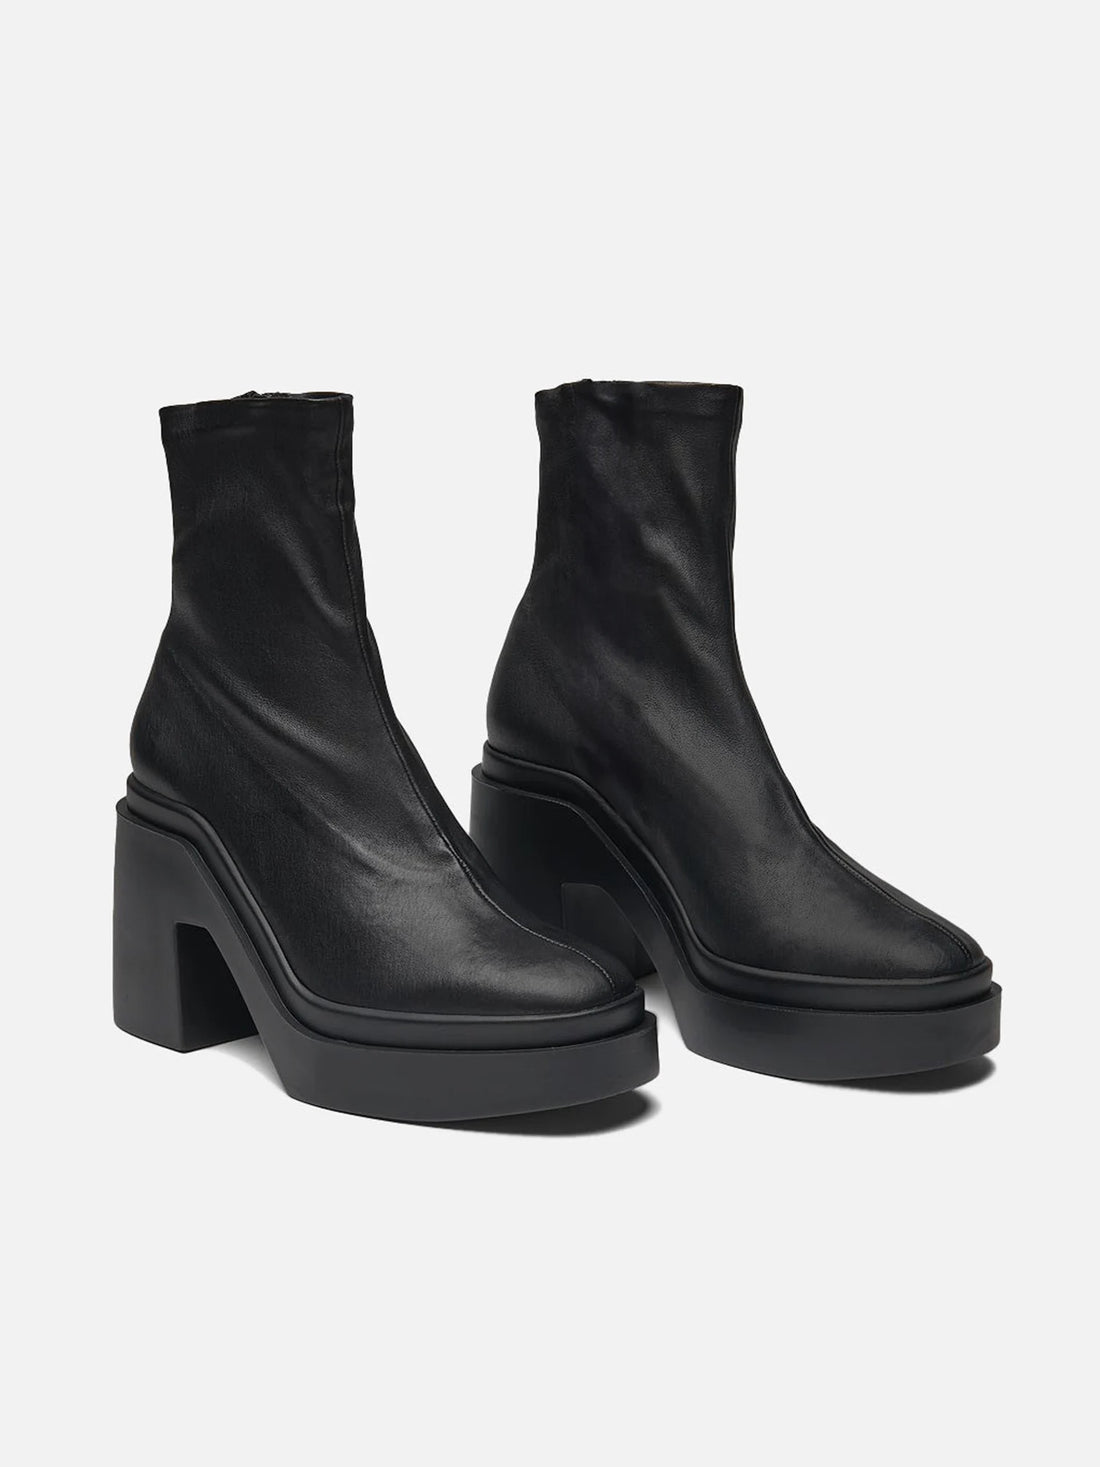 NINA ankle boots, leather black